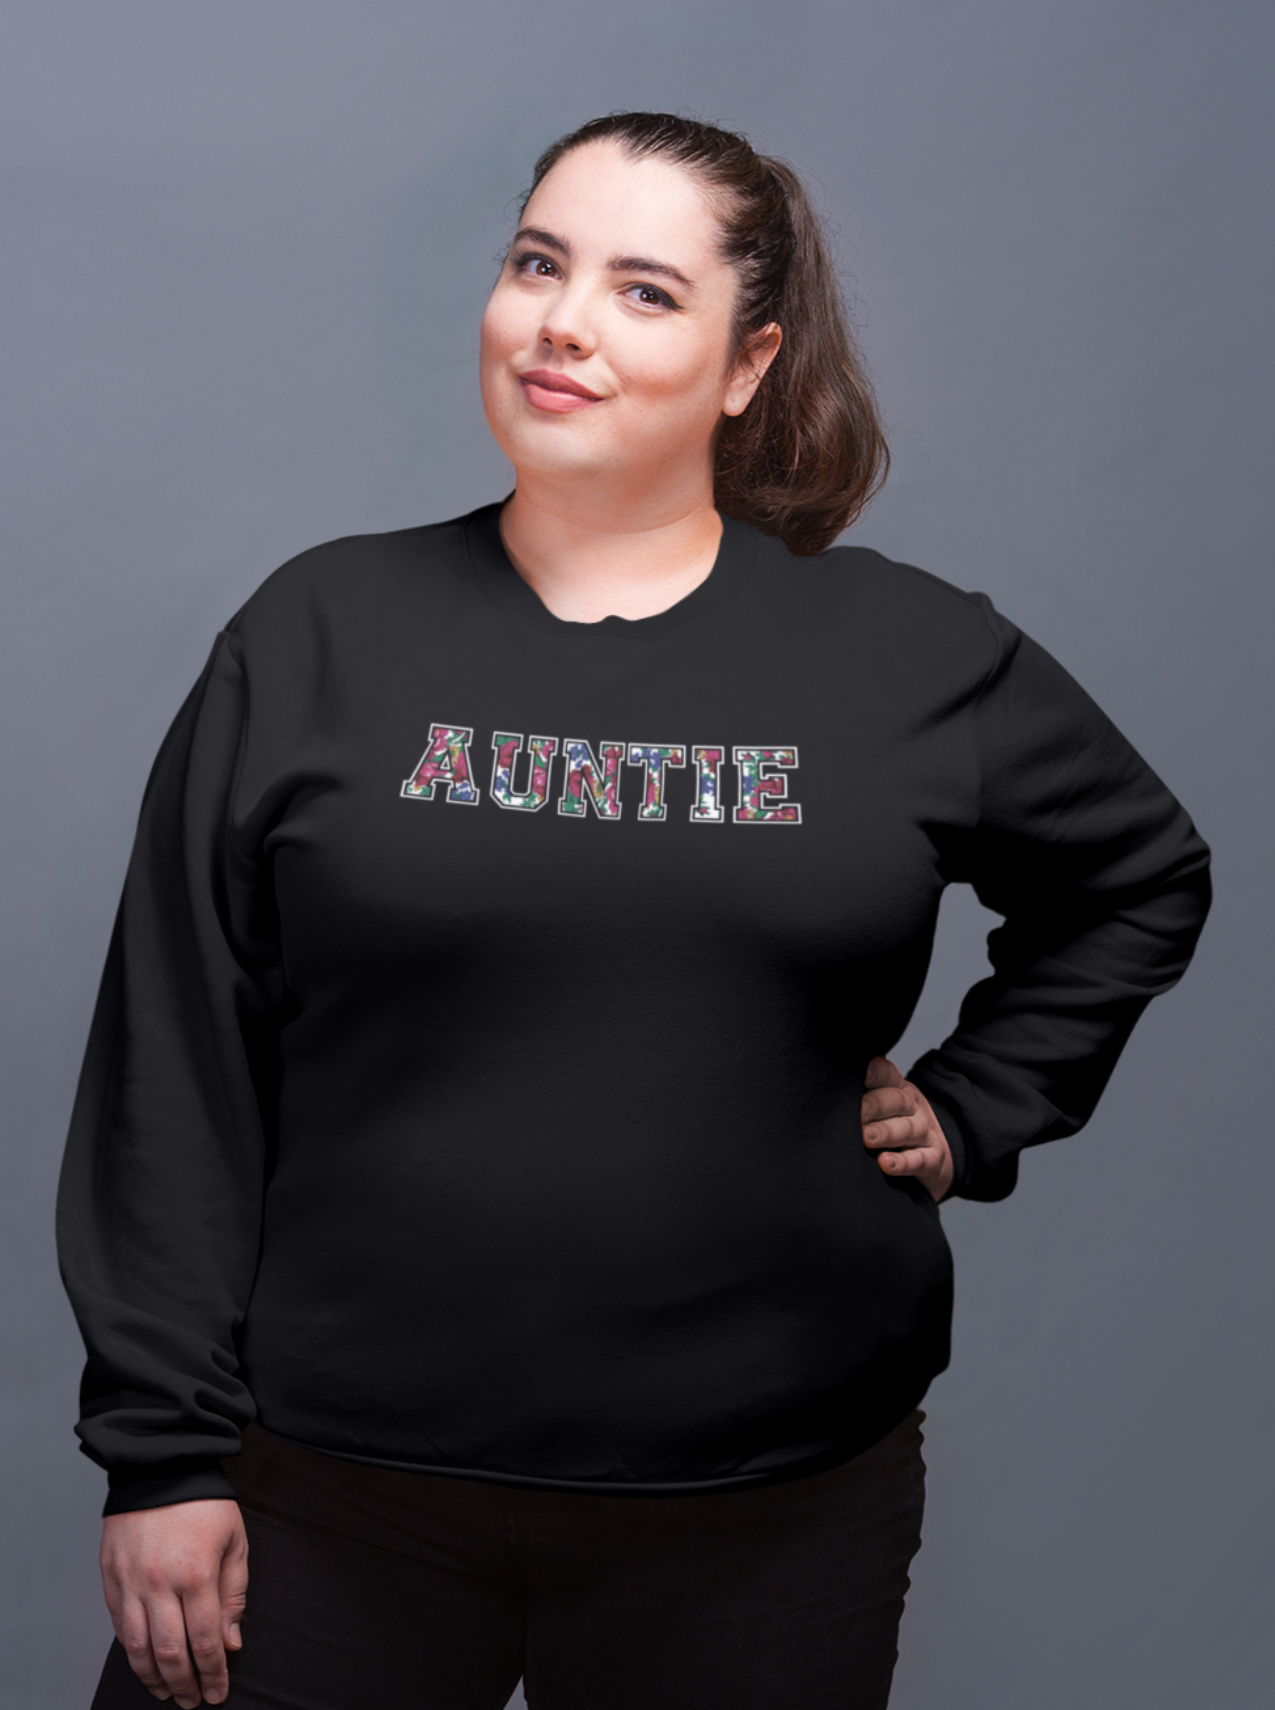 Black crewneck sweater with Auntie floral graphic on a posed model